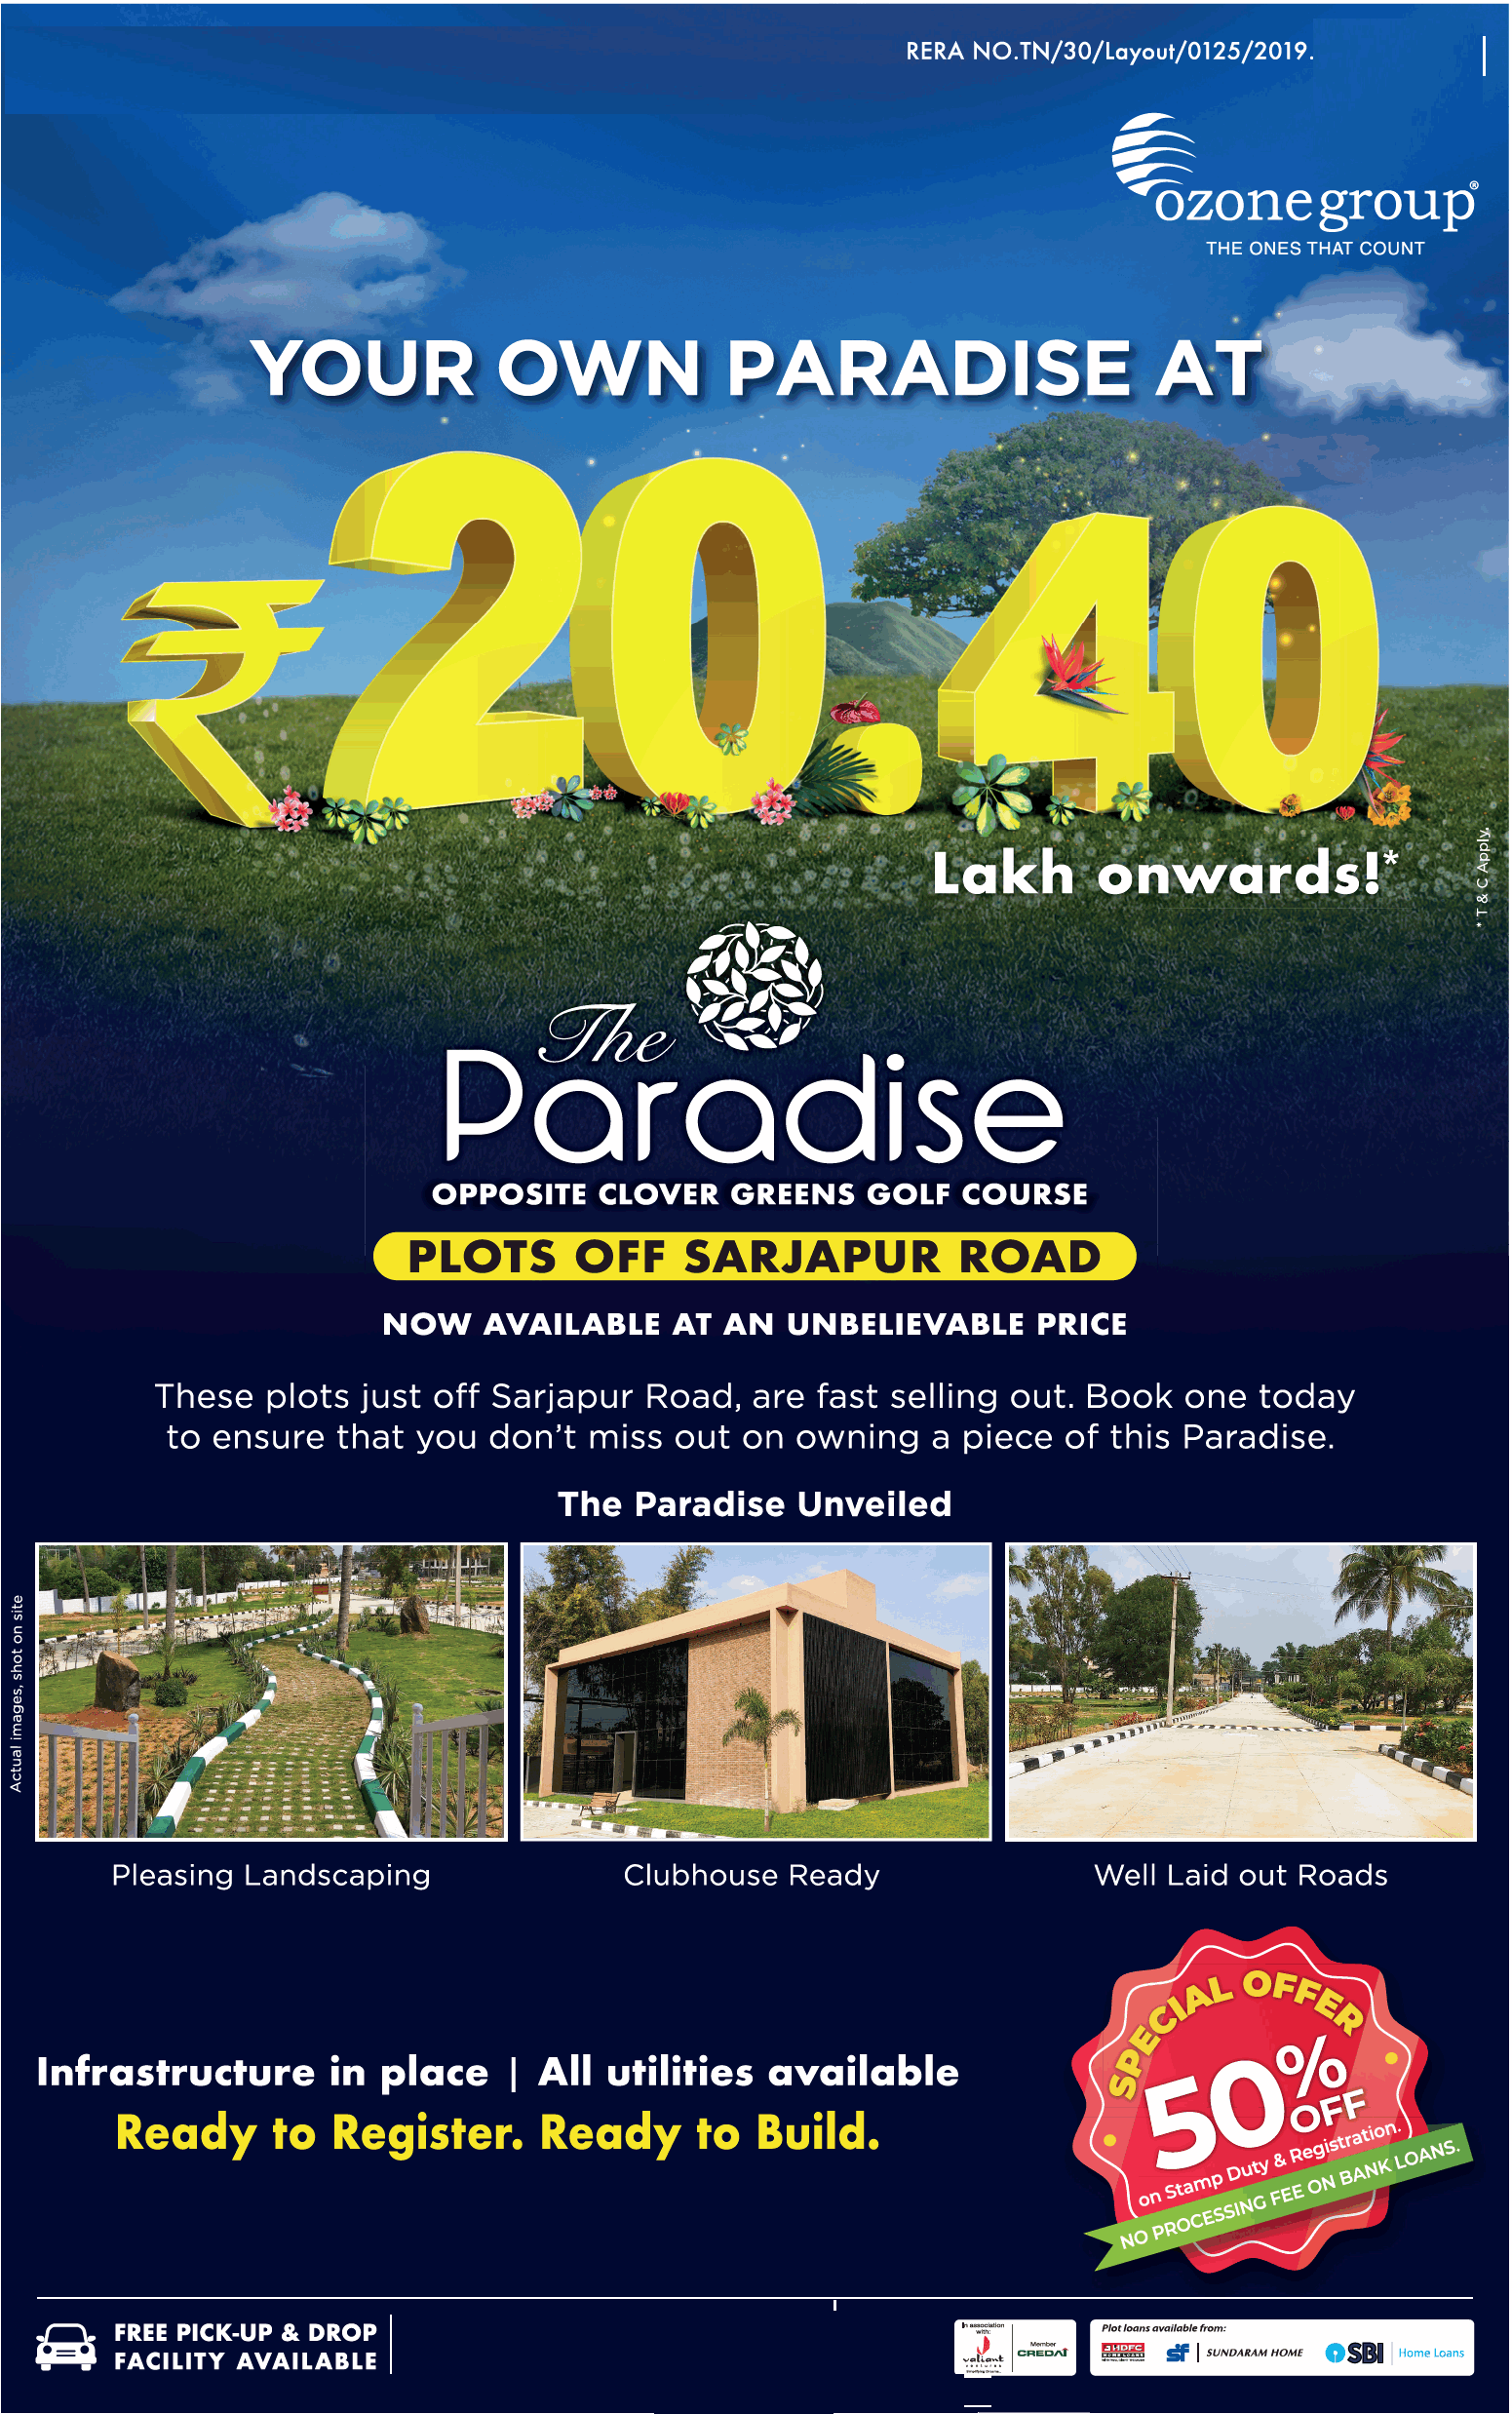 Your own paradise Rs 20.40 Lakh at Ozone The Paradise in Bangalore Update